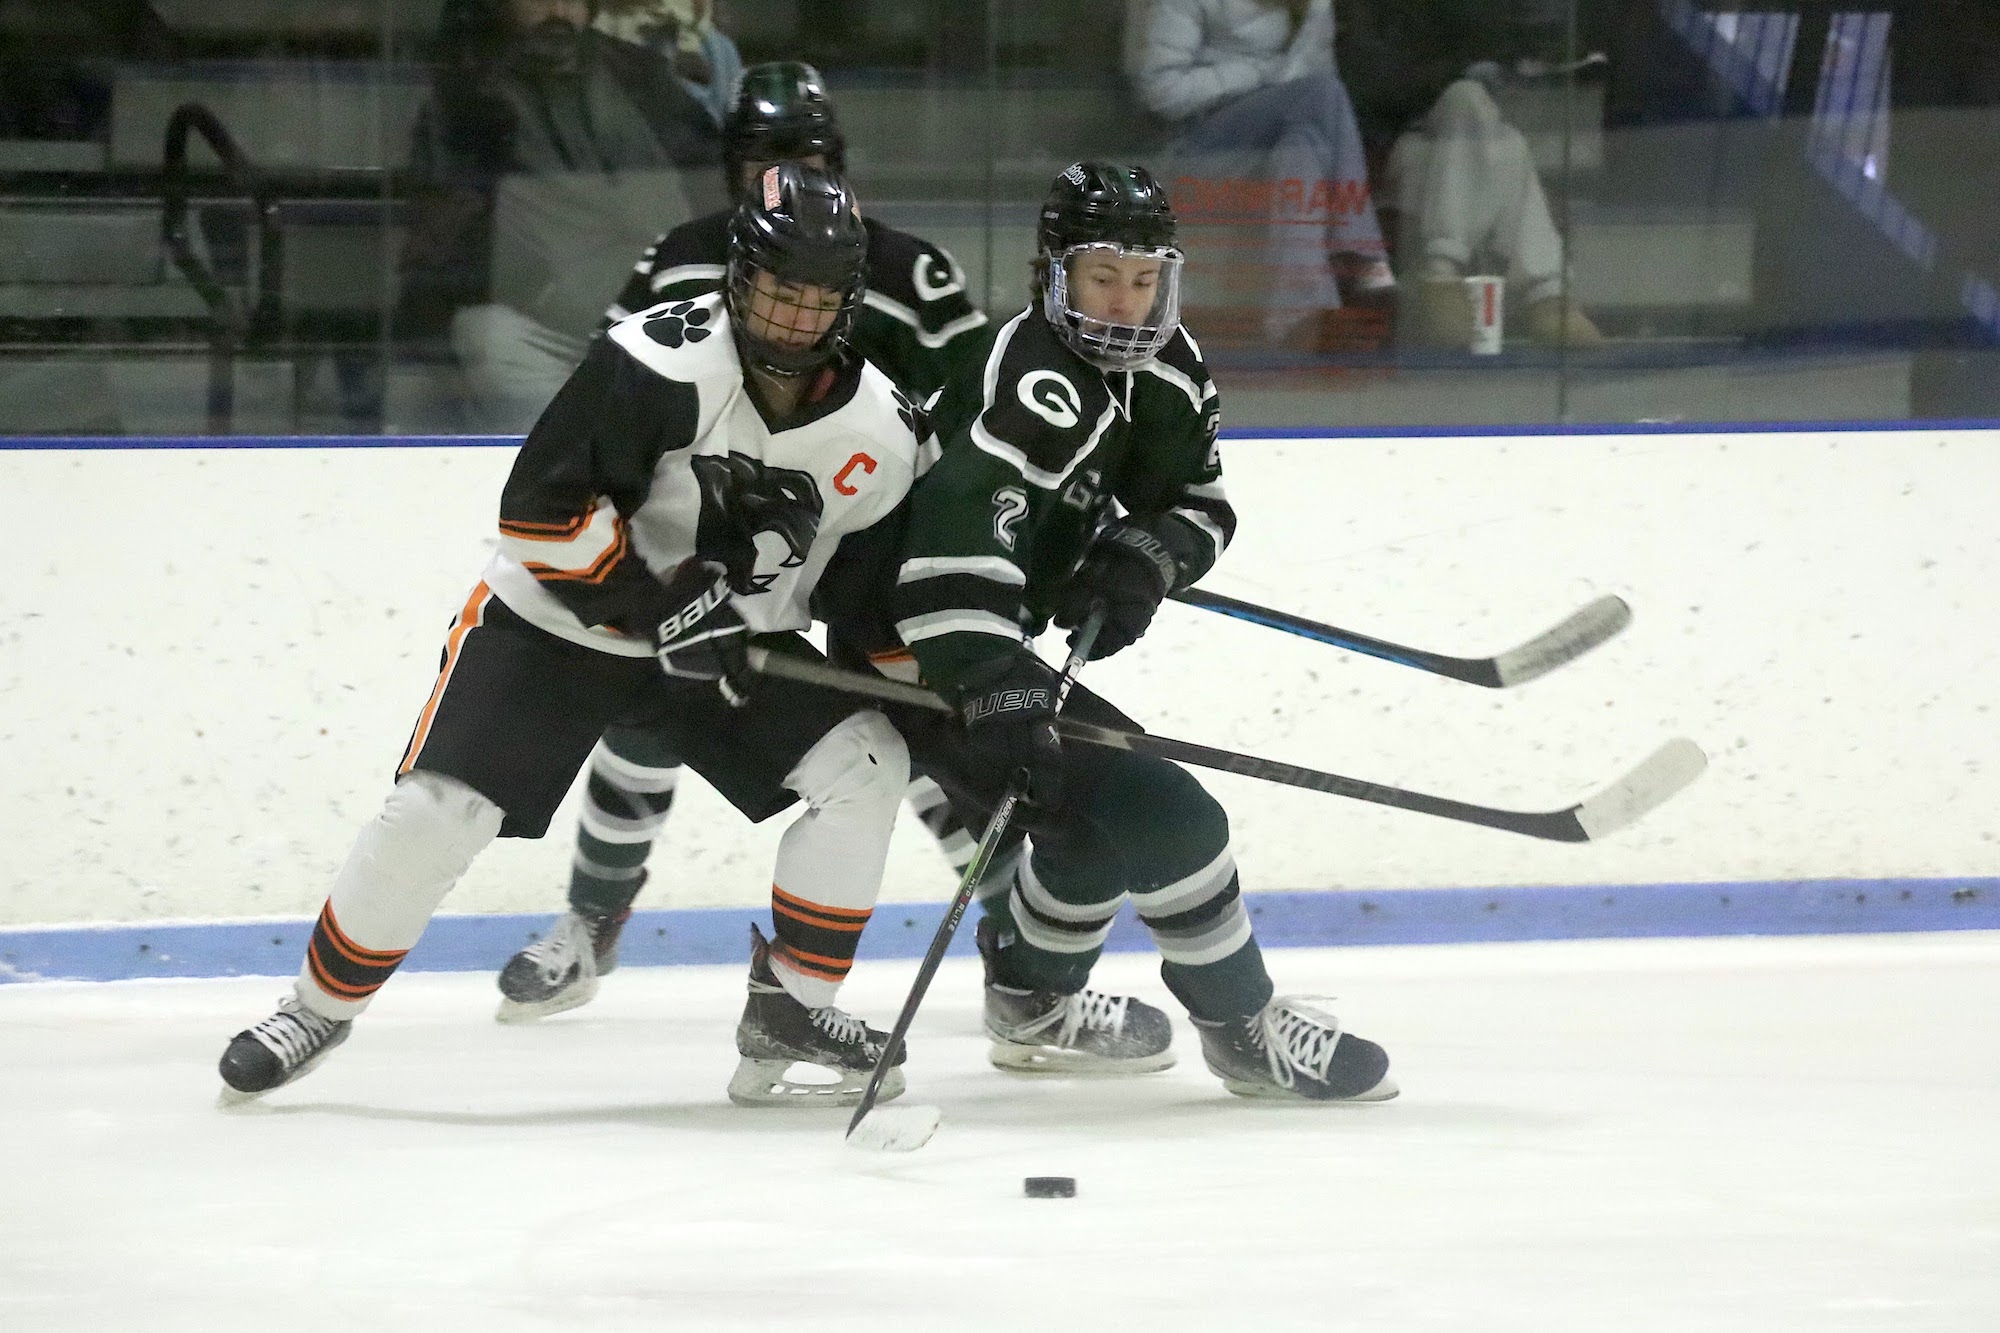 &#8216;A well-earned win&#8217;: Grafton hockey tops Marlborough in low-scoring matchup